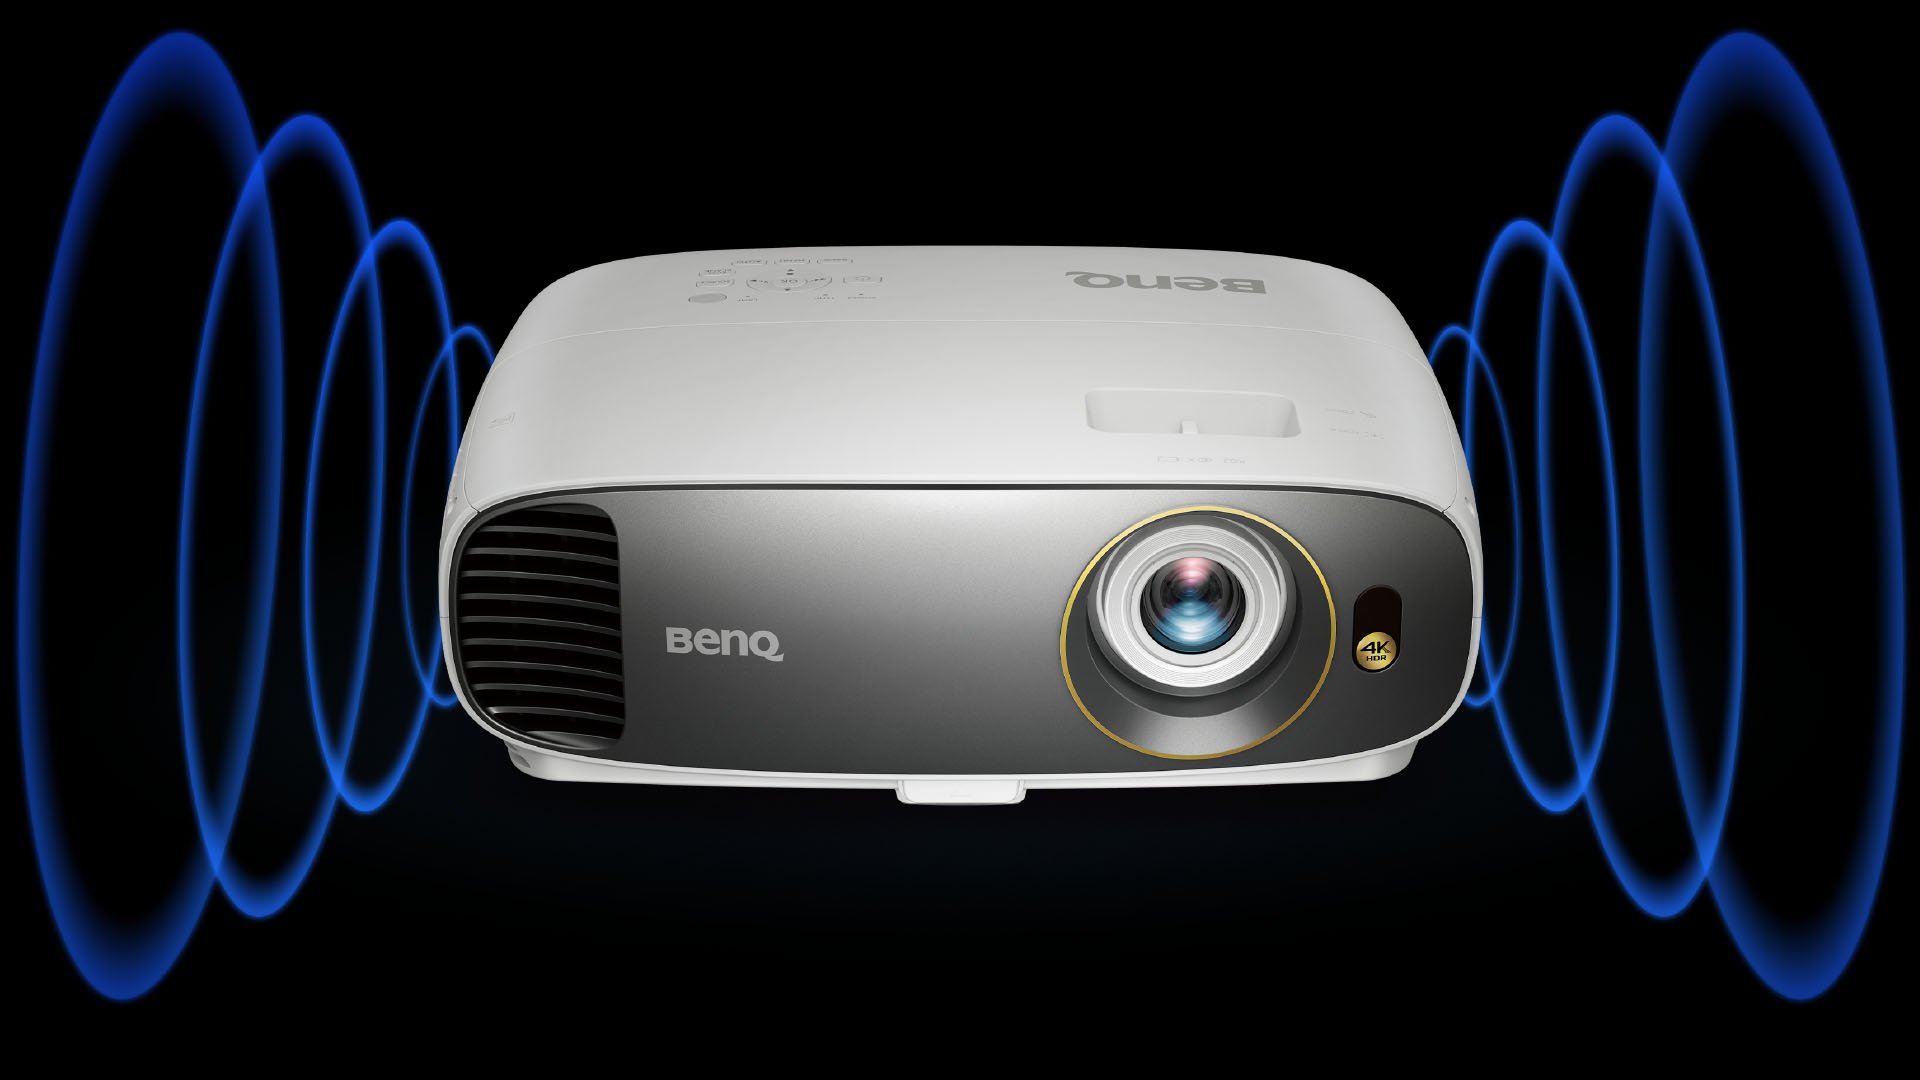 BenQ audio-enhancing technology with 5W chambered speaker